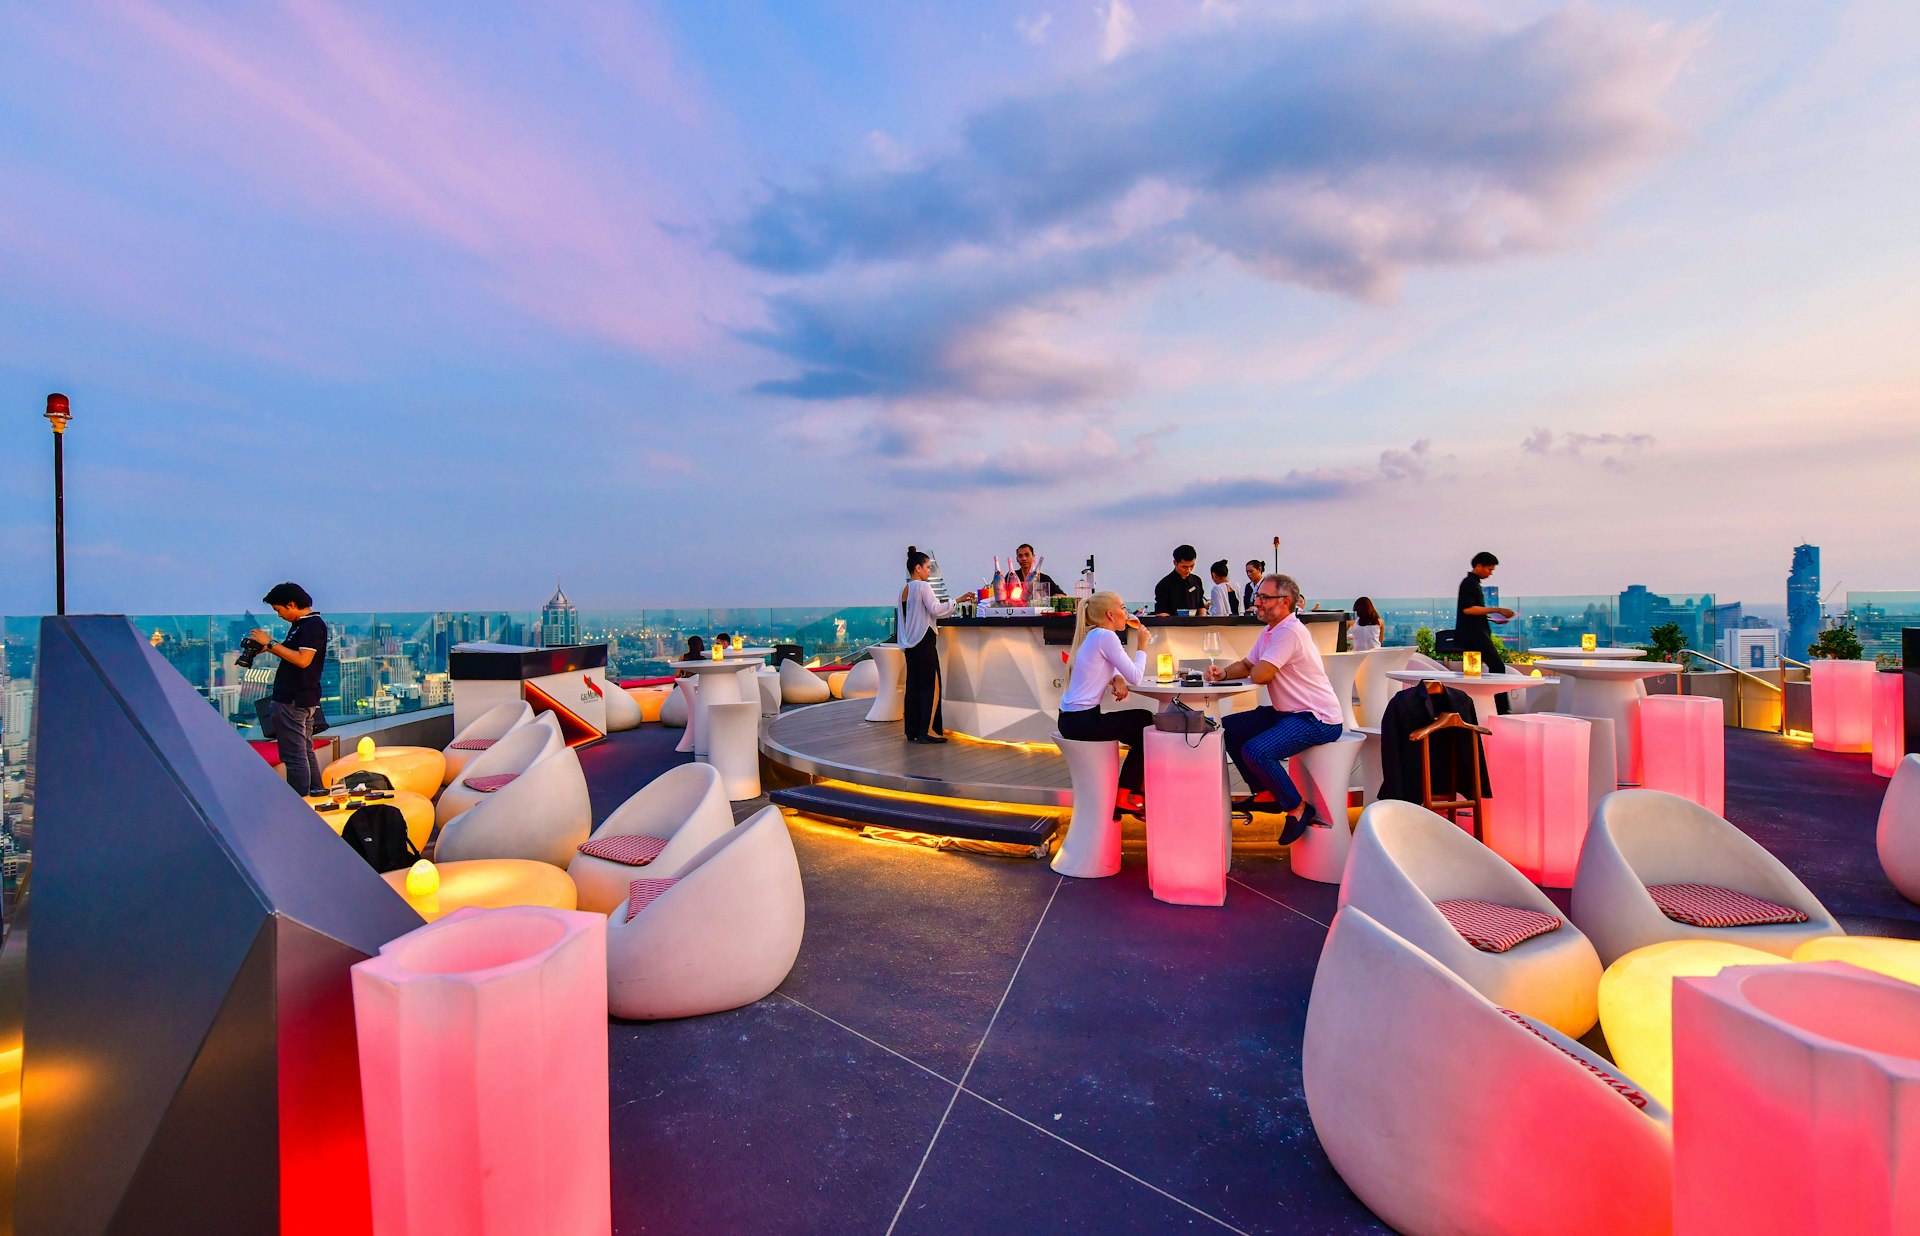 : Twilight view from CRU Champagne Bar at Centara Grand at Central World, overlooking a magnificent cityscape of Bangkok.